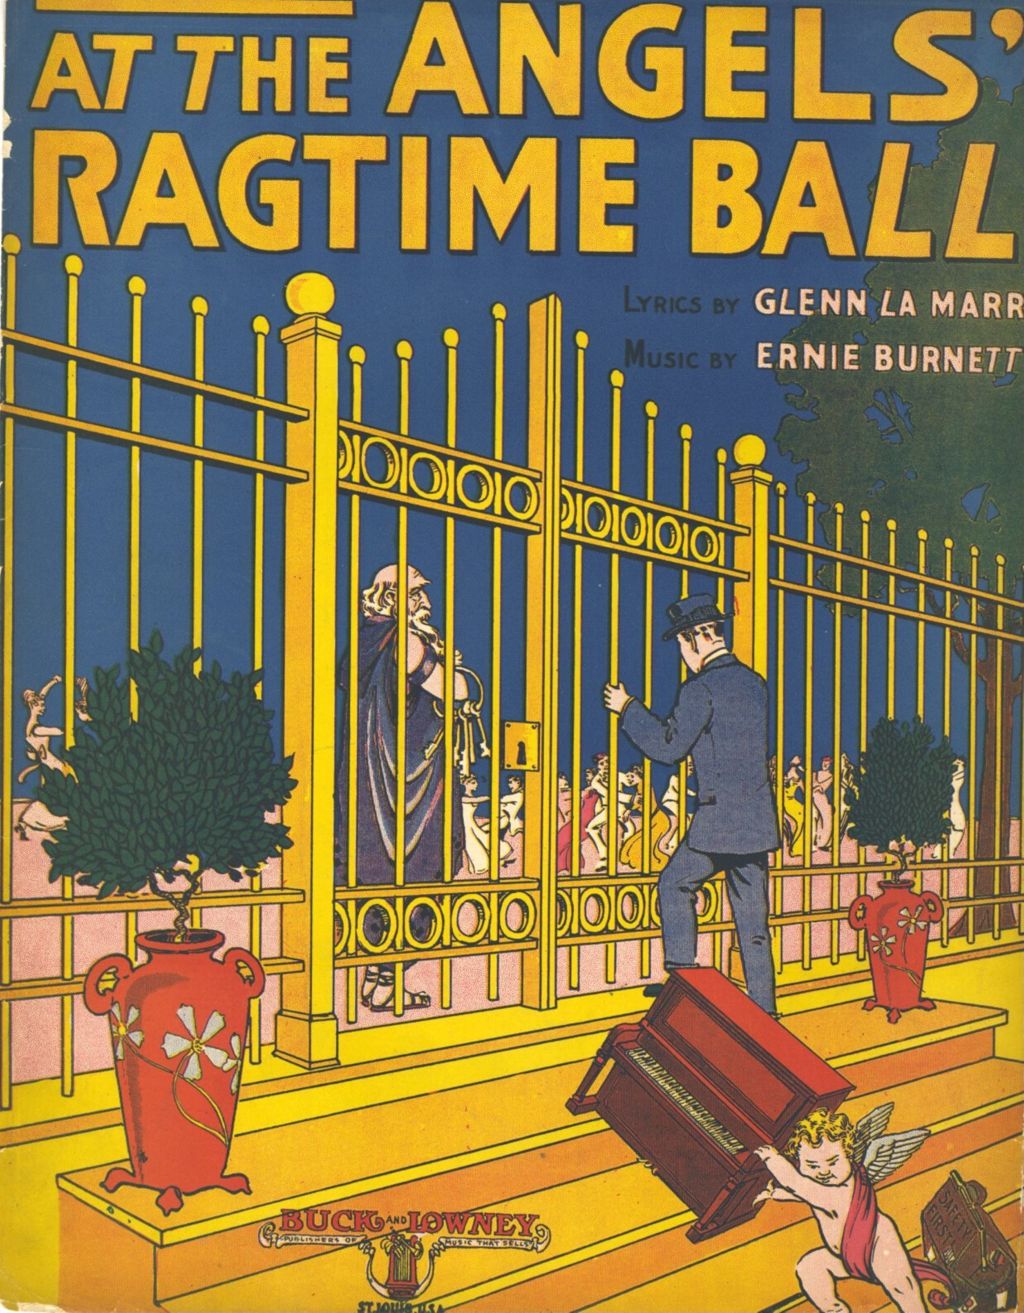 Miniature of At the Angels' Ragttime Ball